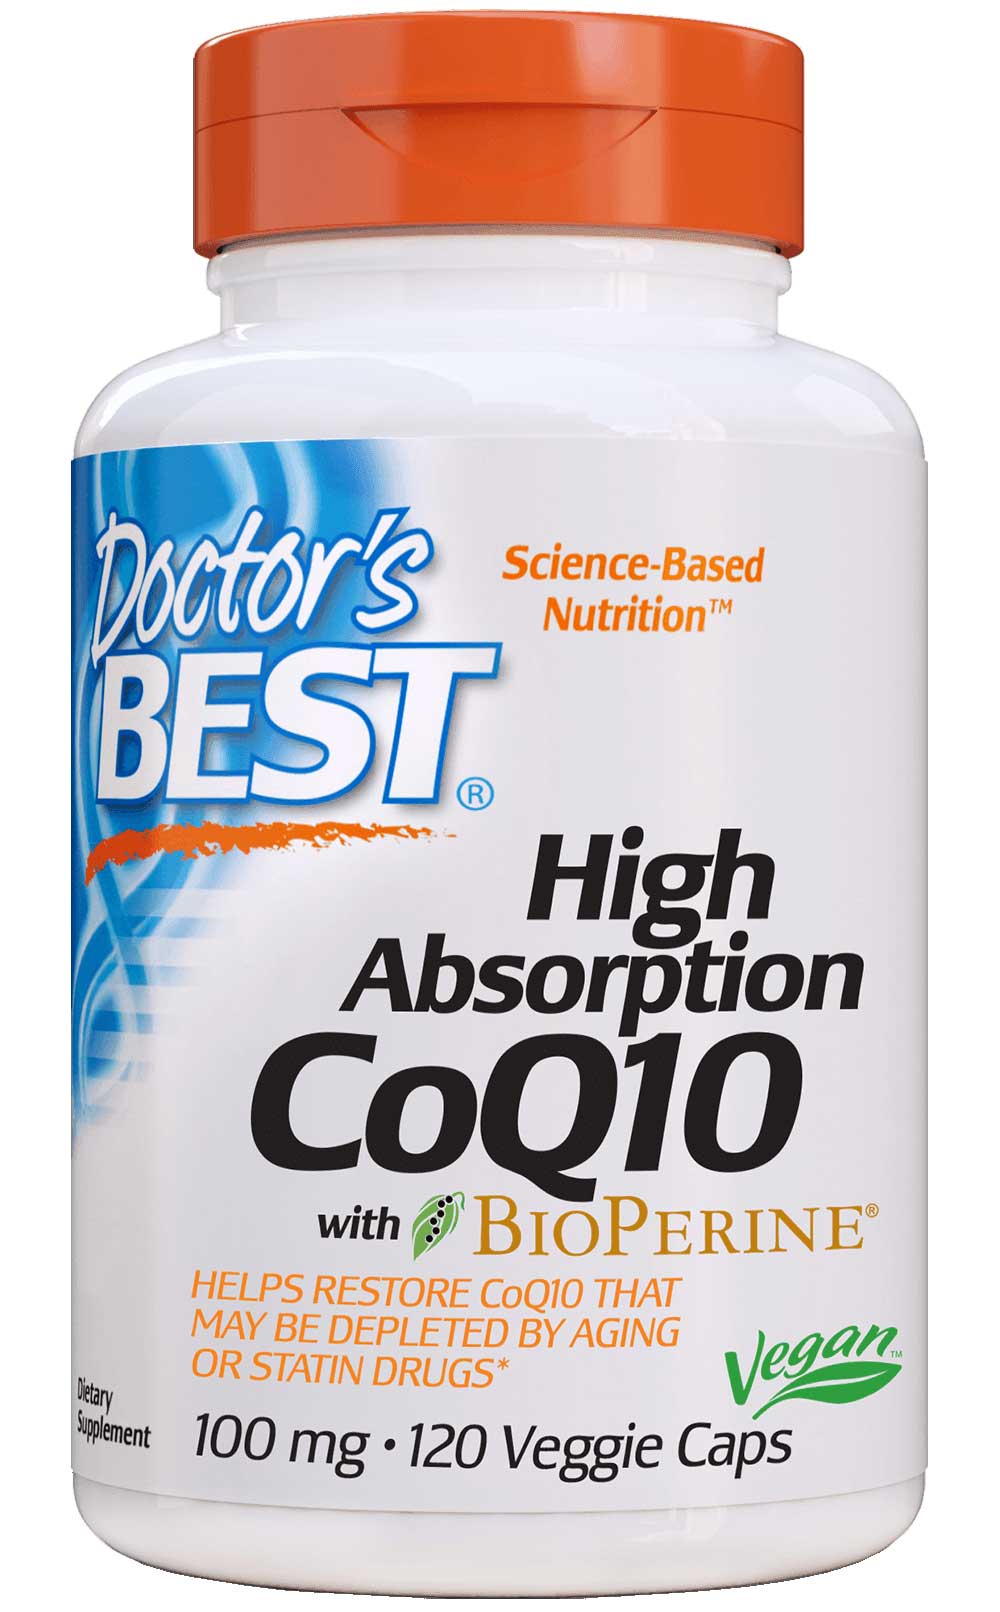 Doctor's Best High Absorption CoQ10 with BioPerine 100 mg (Veggie Caps)